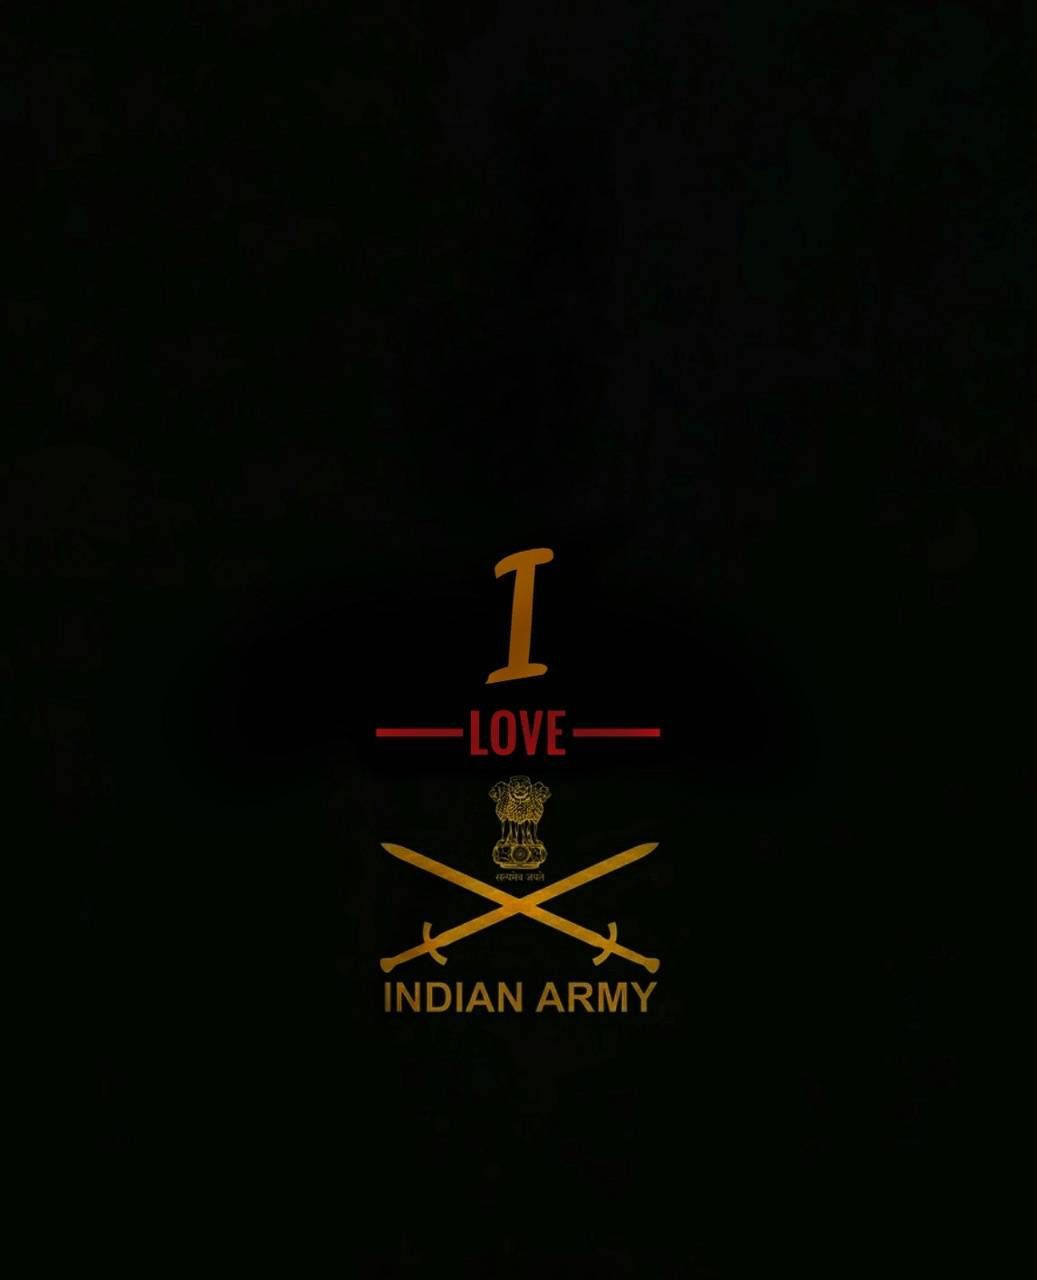 Indian Army Logo I Love Background